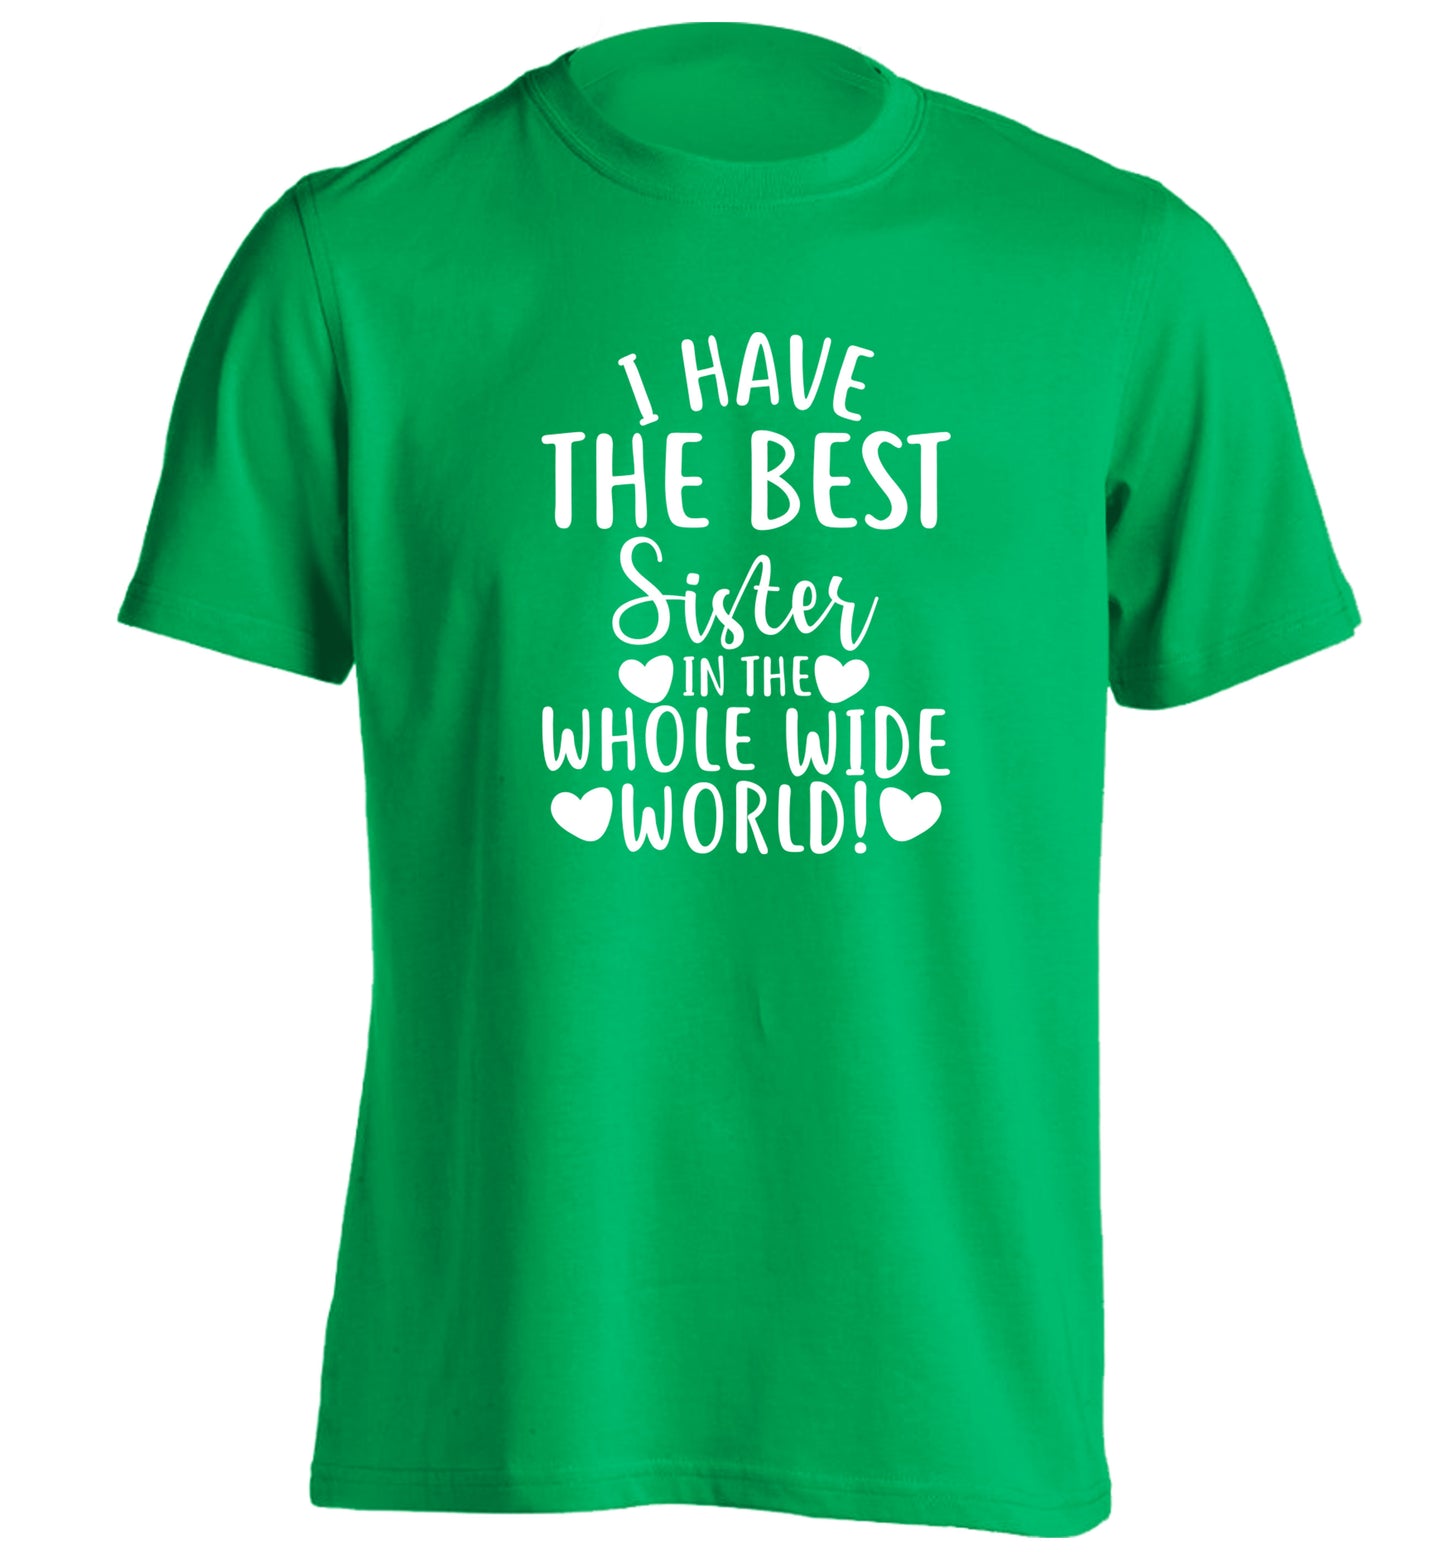 I have the best sister in the whole wide world! adults unisex green Tshirt 2XL